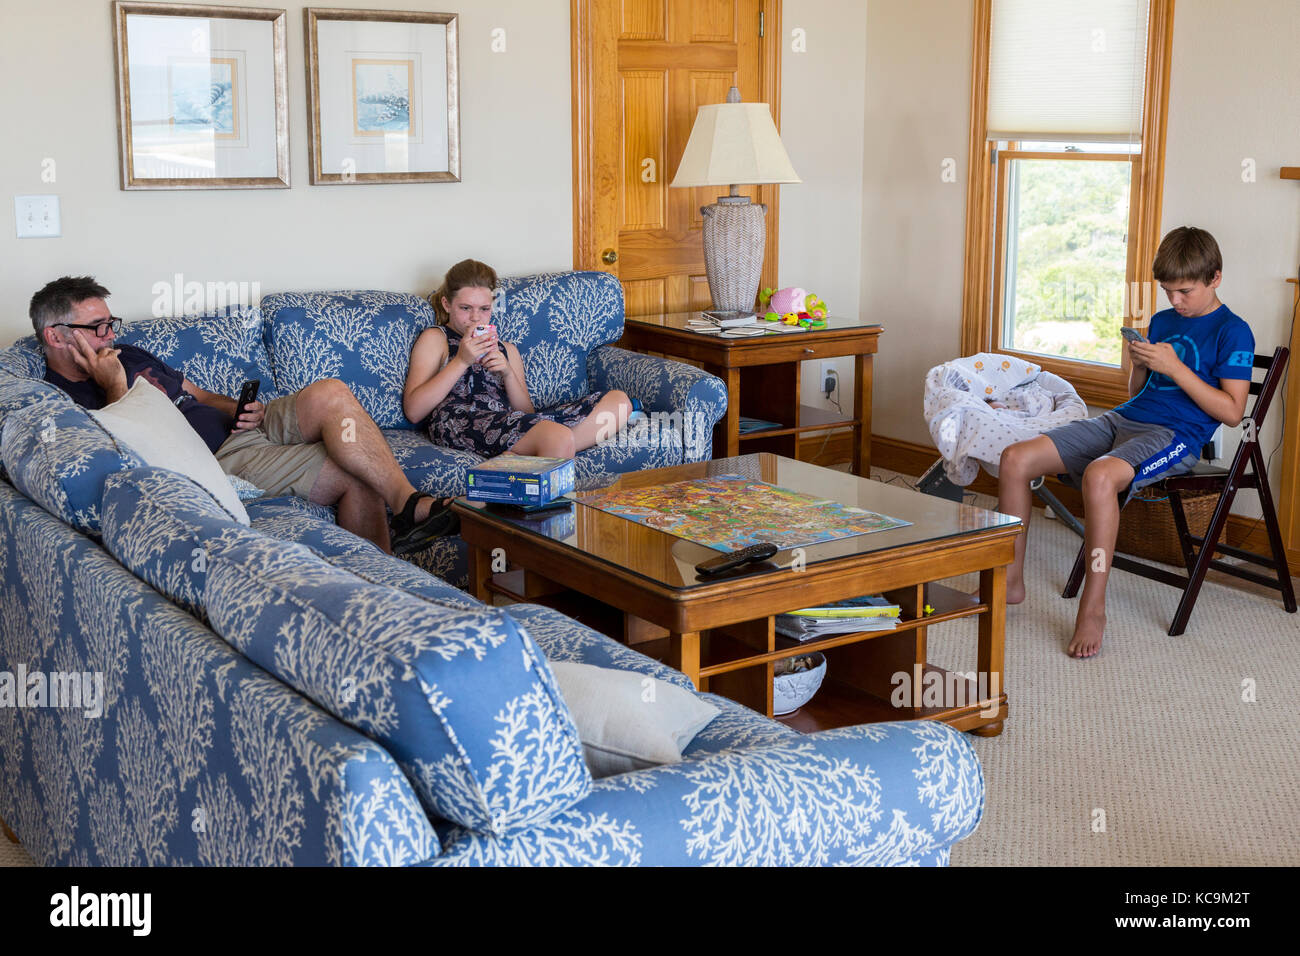 Avon, Outer Banks, North Carolina, USA. American Family Using Cell Phones and Mobile gaming Devices in Living Room While at Beach vacation Home. Stock Photo